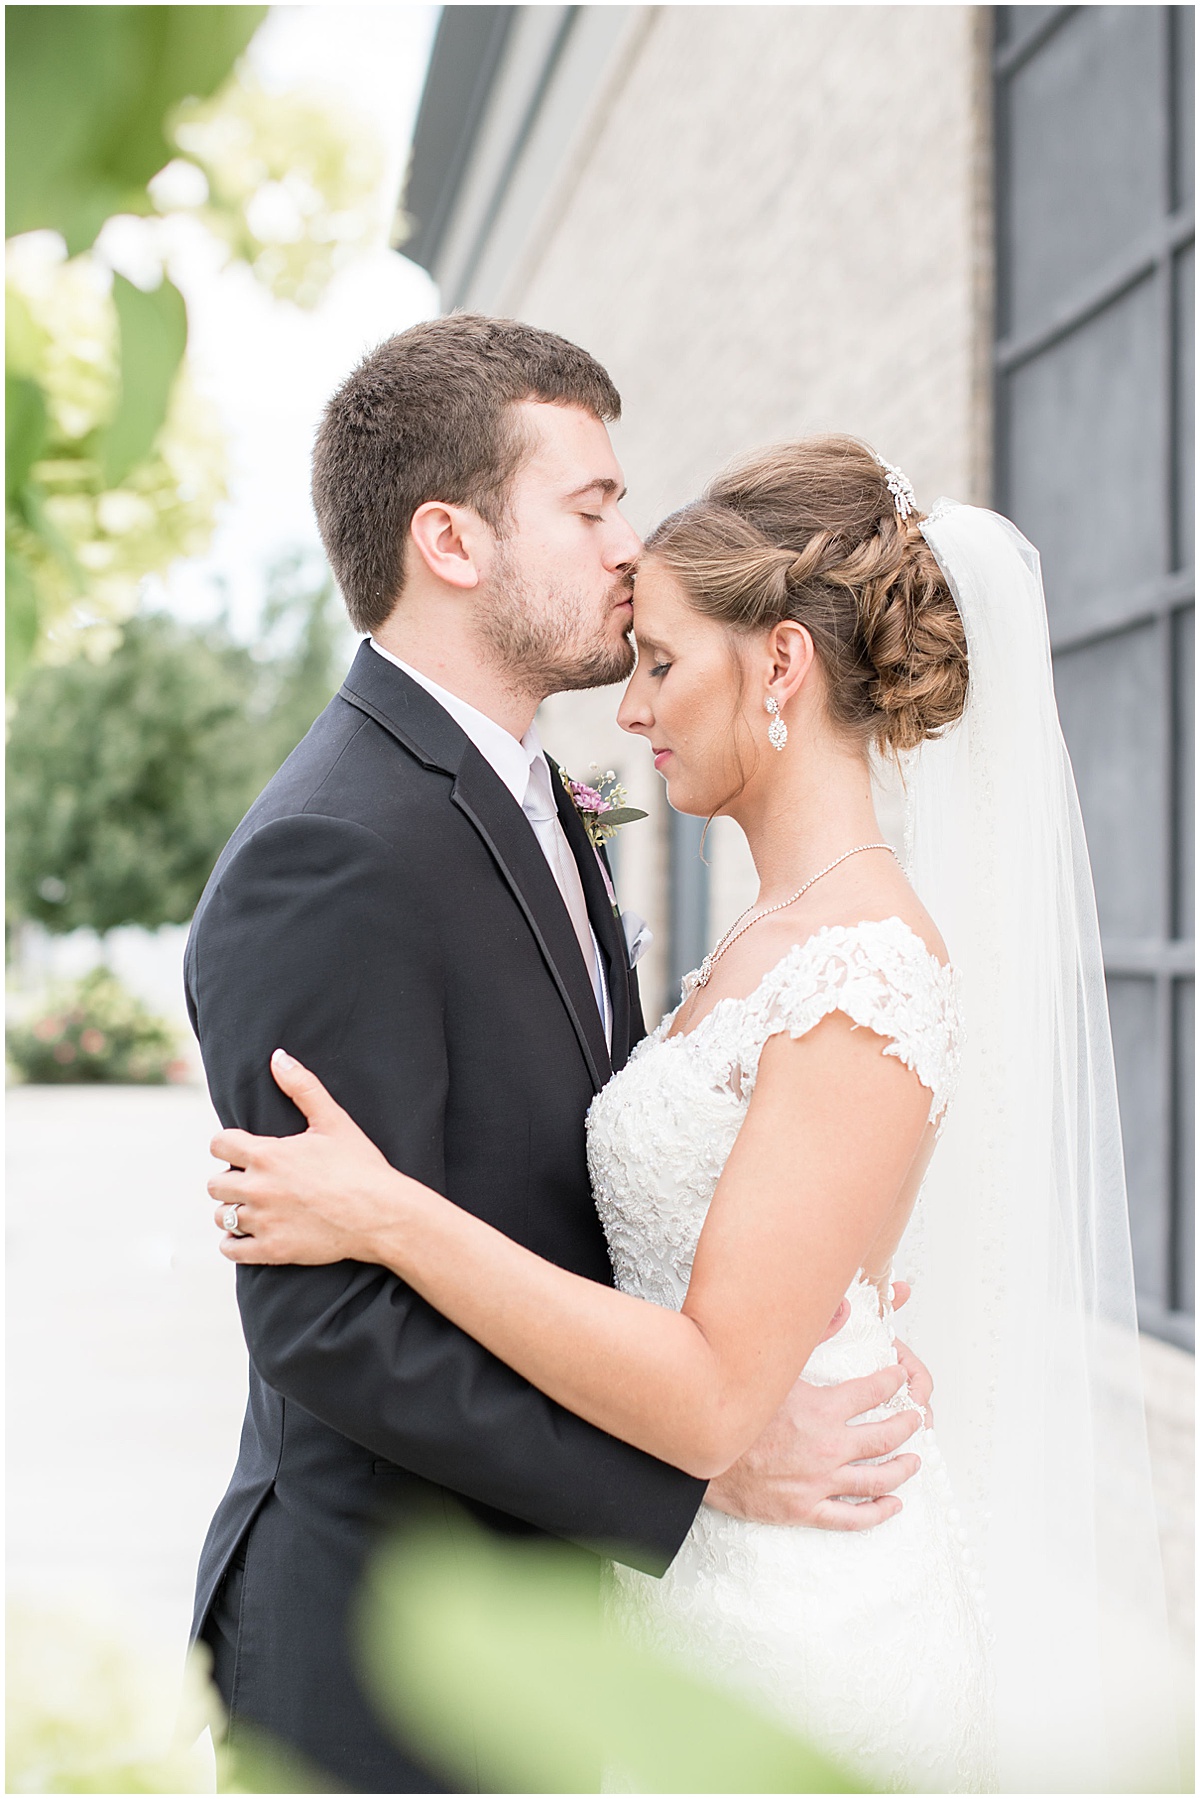 Just married photos after Bel Air Events wedding in Kokomo, Indiana by Victoria Rayburn Photography